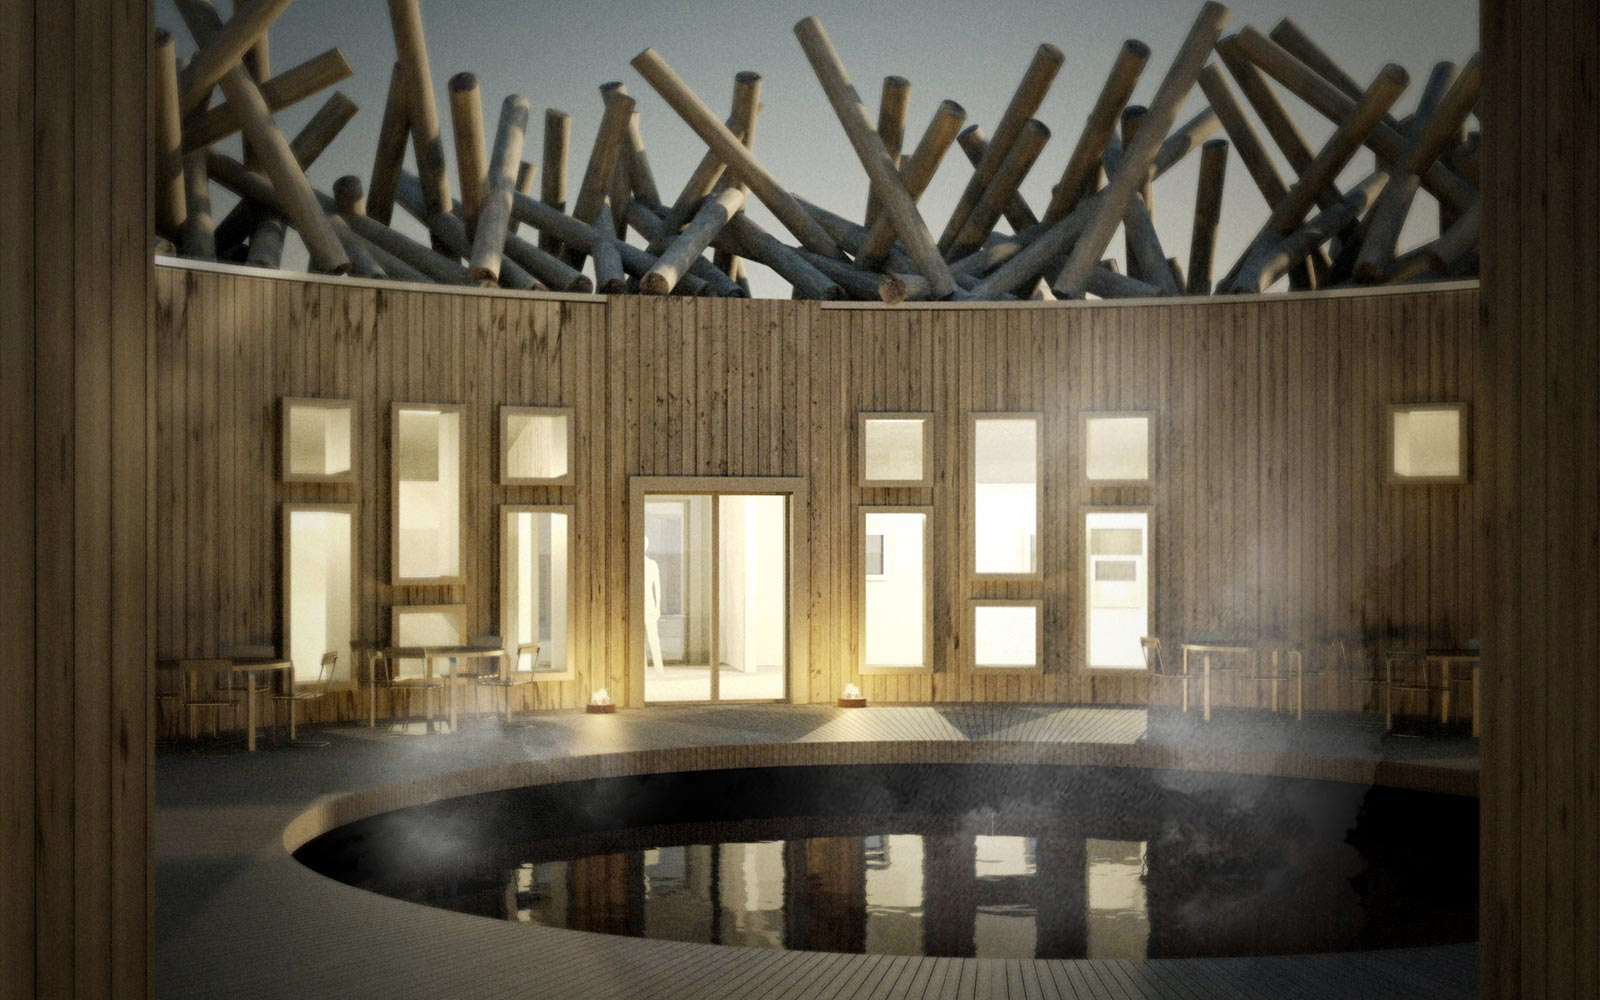 You can now book a room at Sweden’s floating Arctic Bath hotel